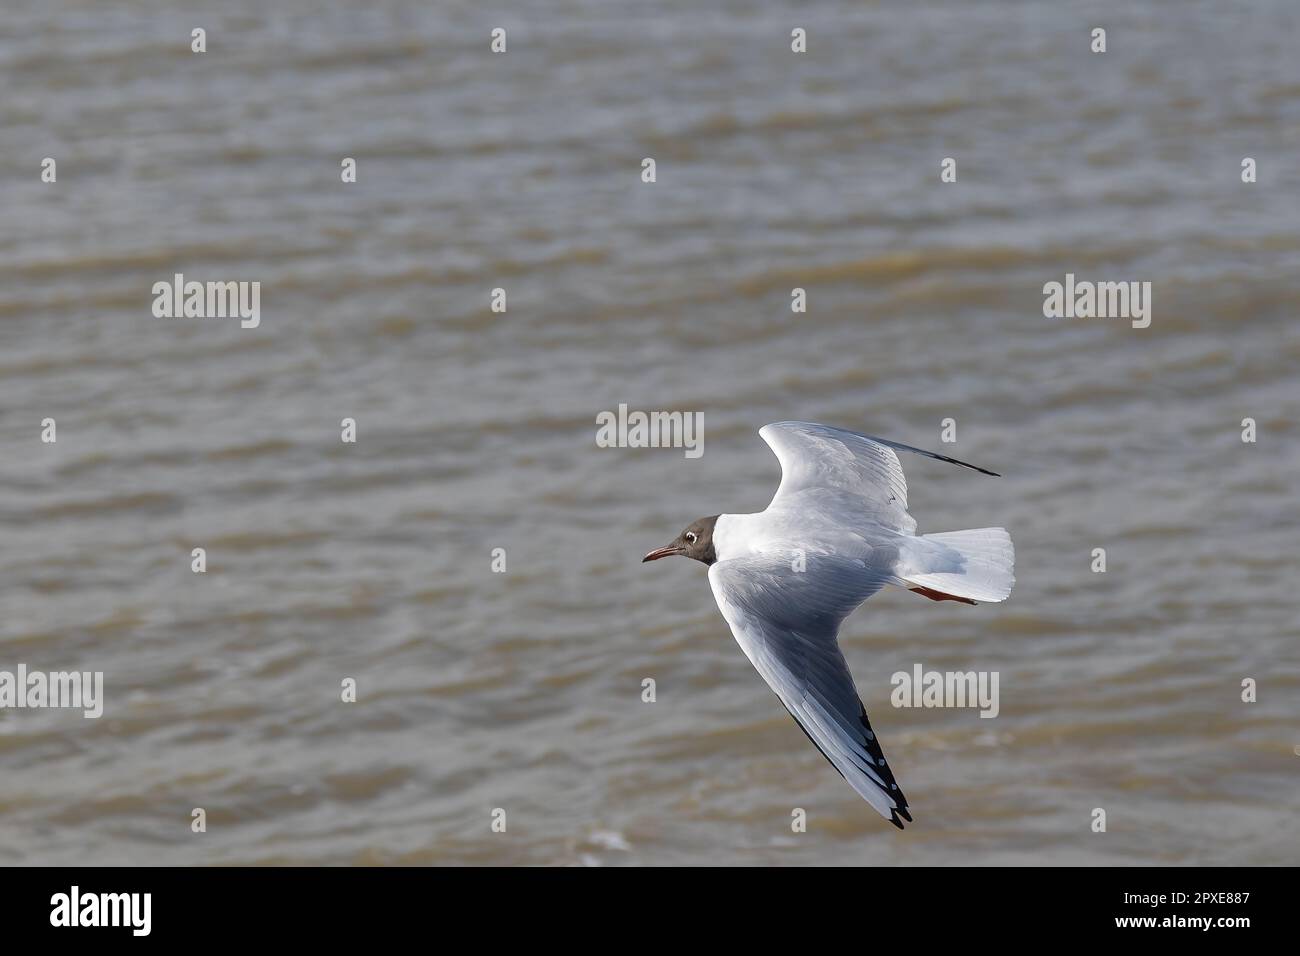 A seagull (larum) flies slightly above the coastline of the North sea with water in the background Stock Photo